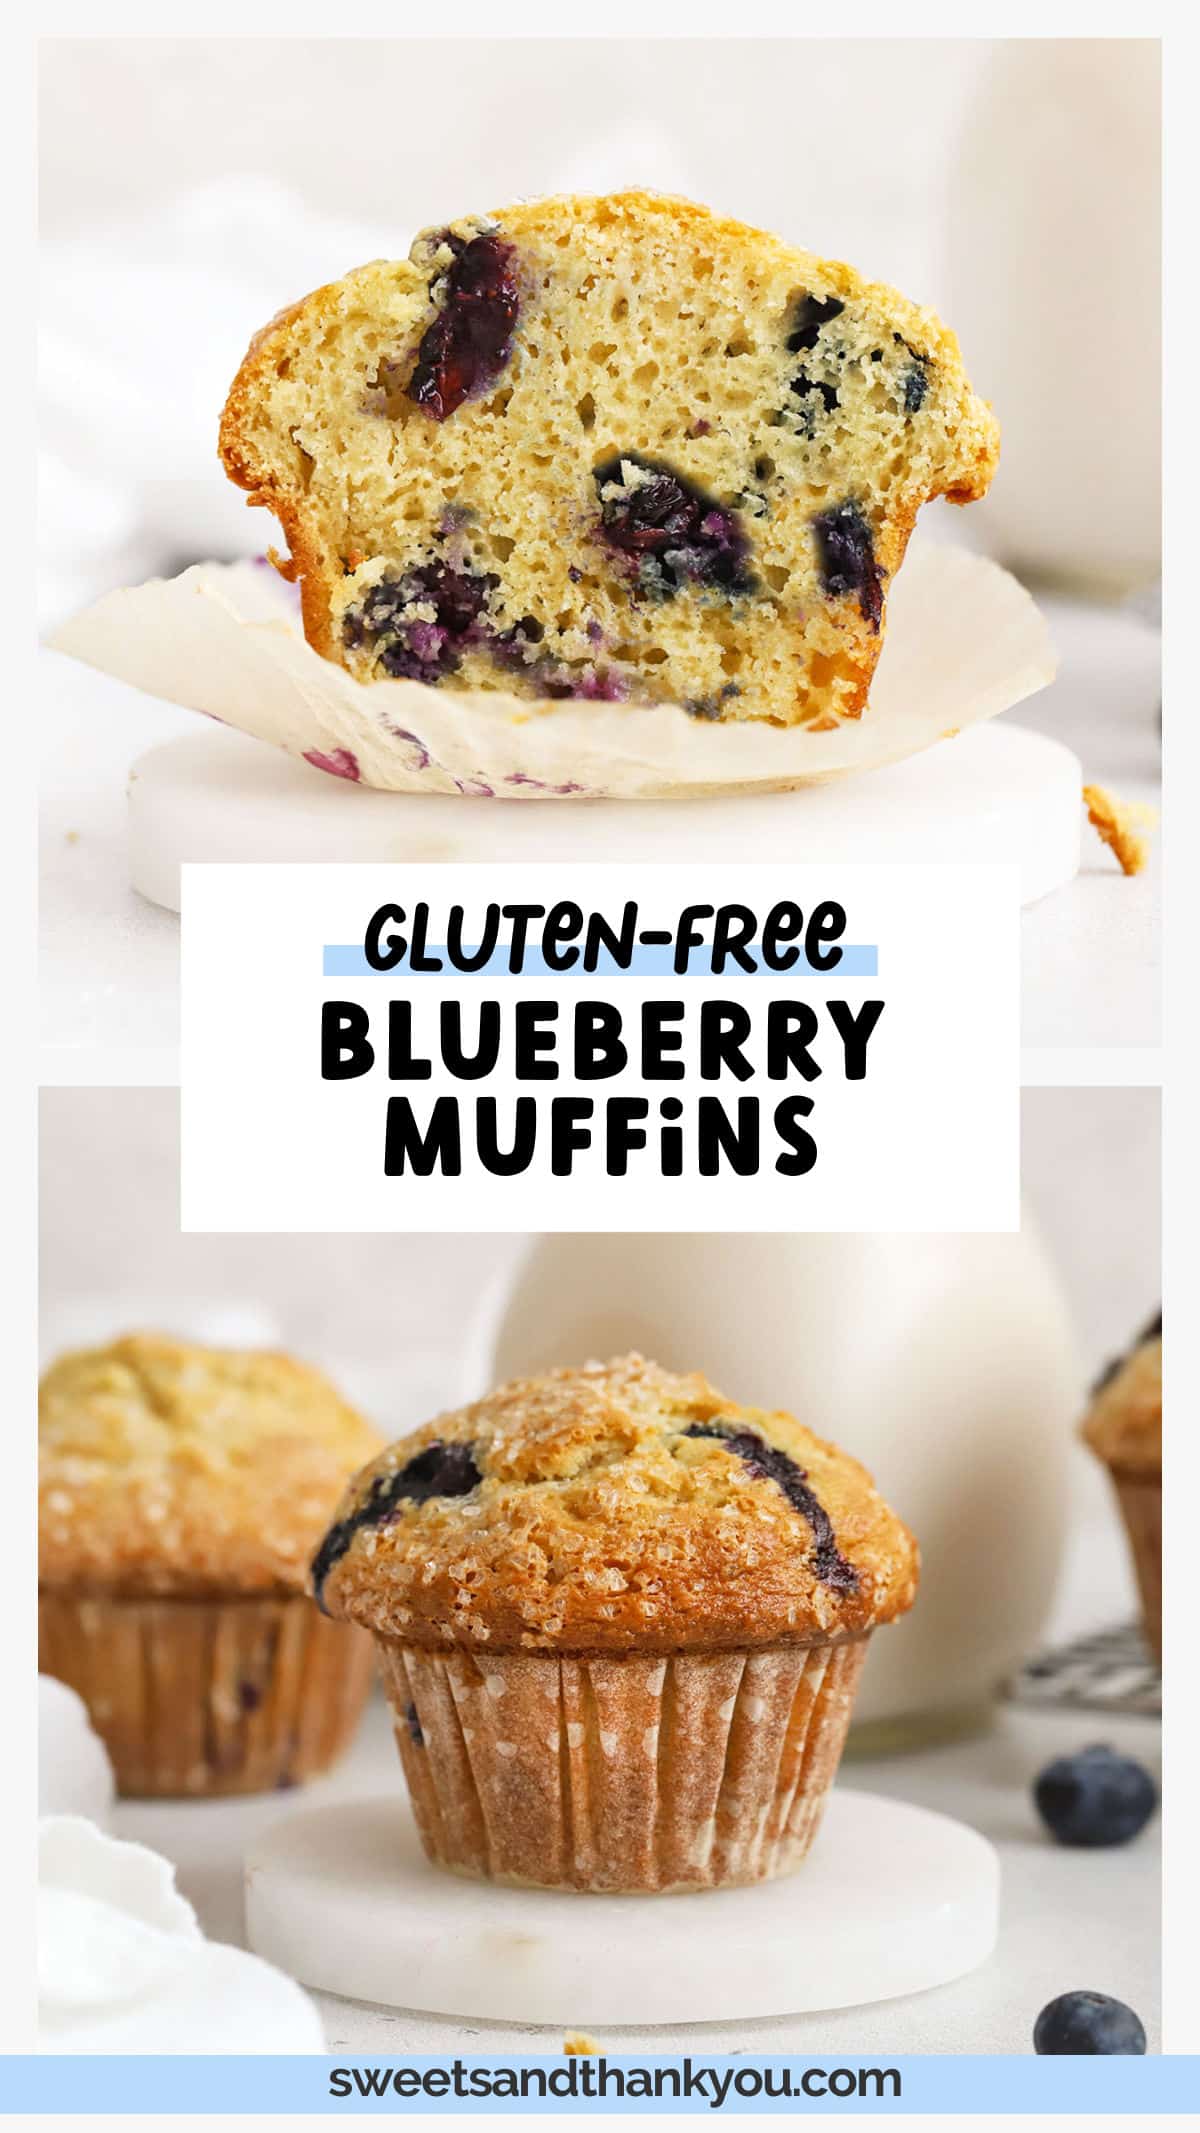 If you've been looking for the best gluten-free blueberry muffin recipe, your search stops here! These bakery-style gluten-free blueberry muffins are light, fluffy, and packed with fresh blueberry flavor. Made from scratch with simple ingredients, they're perfect for a special breakfast or gluten-free brunch! 